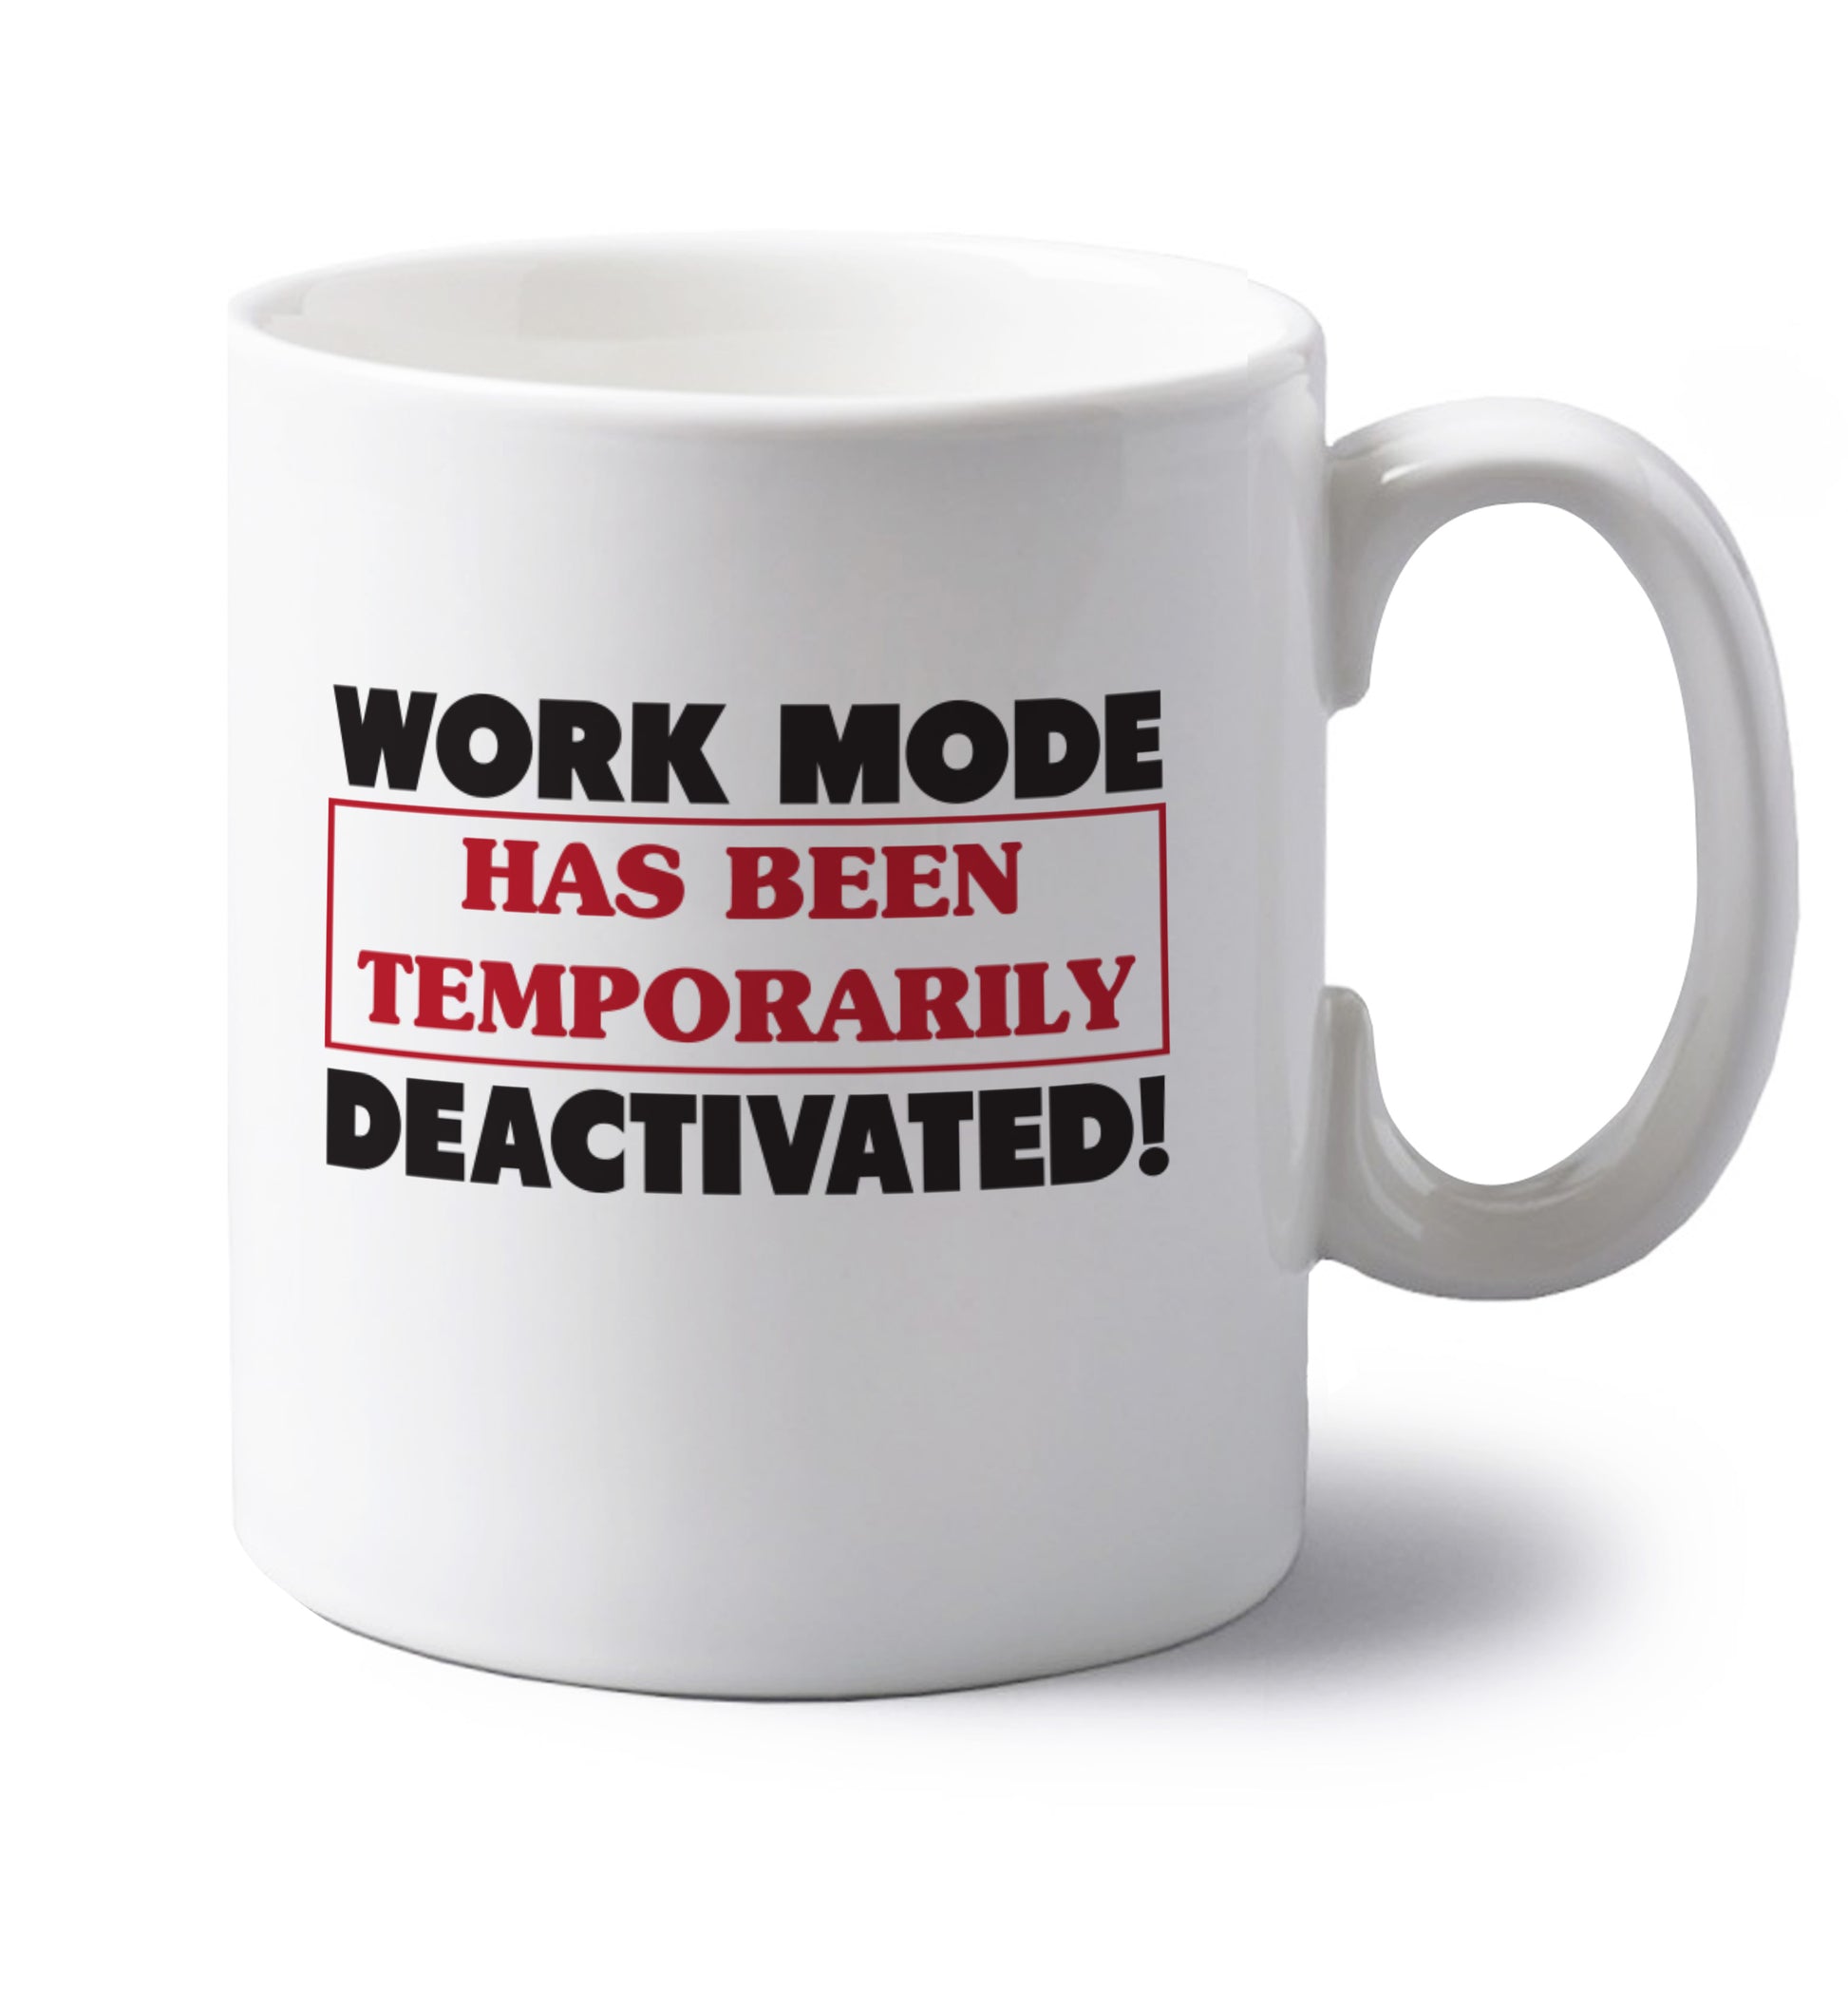 Work mode has now been temporarily deactivated left handed white ceramic mug 